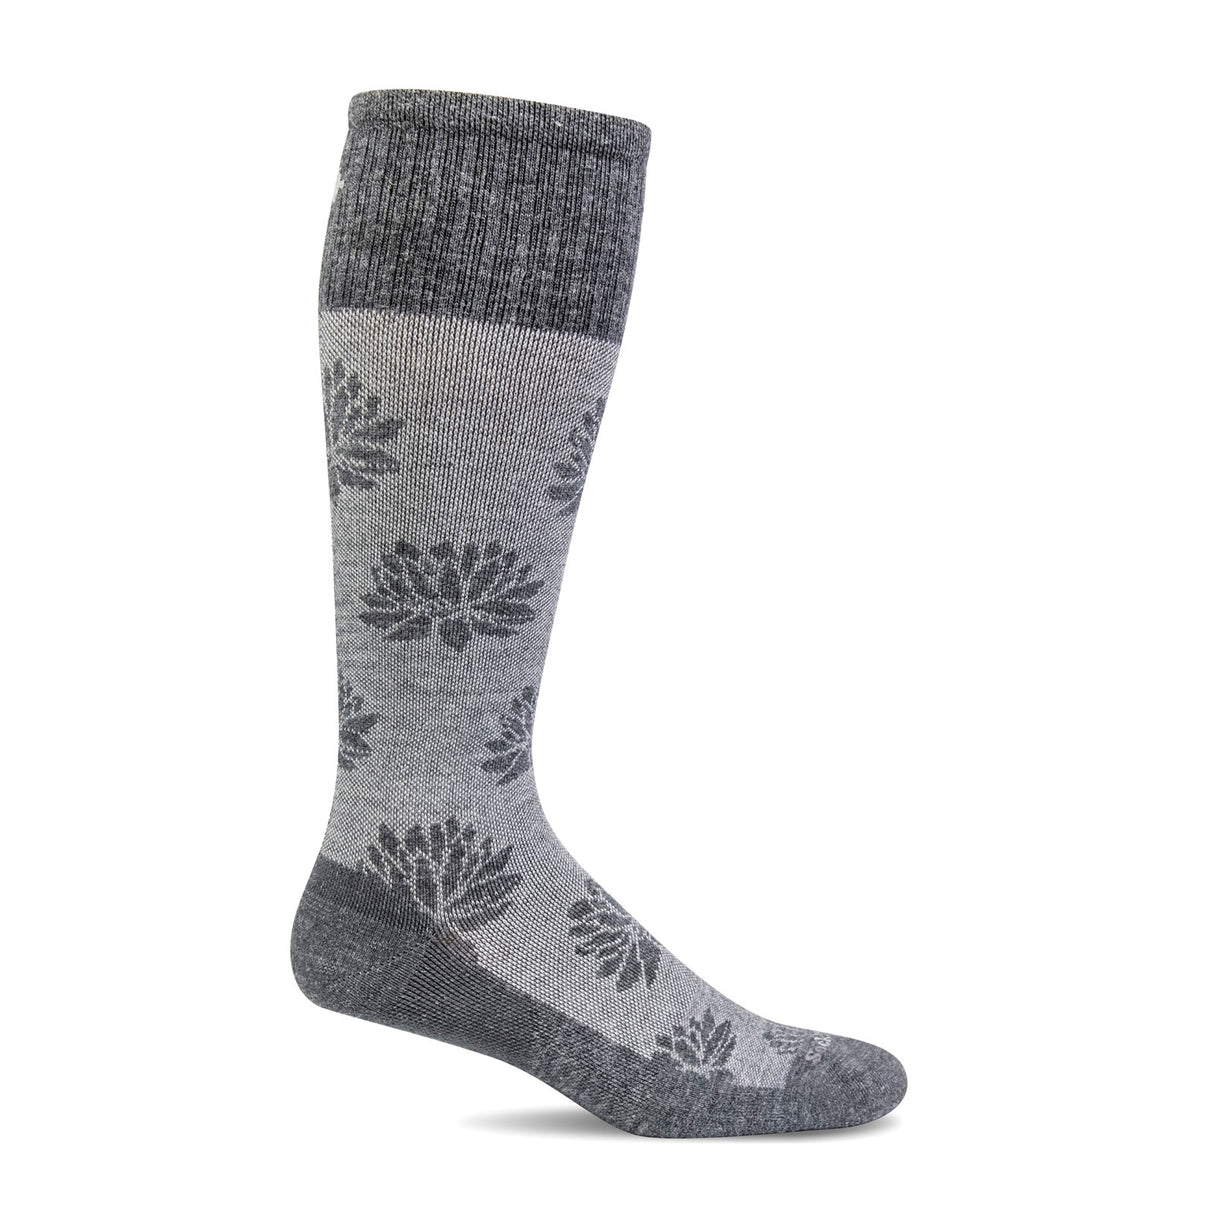 Sockwell Lotus Lift Over the Calf Compression Sock (Women) - Charcoal Accessories - Socks - Compression - The Heel Shoe Fitters